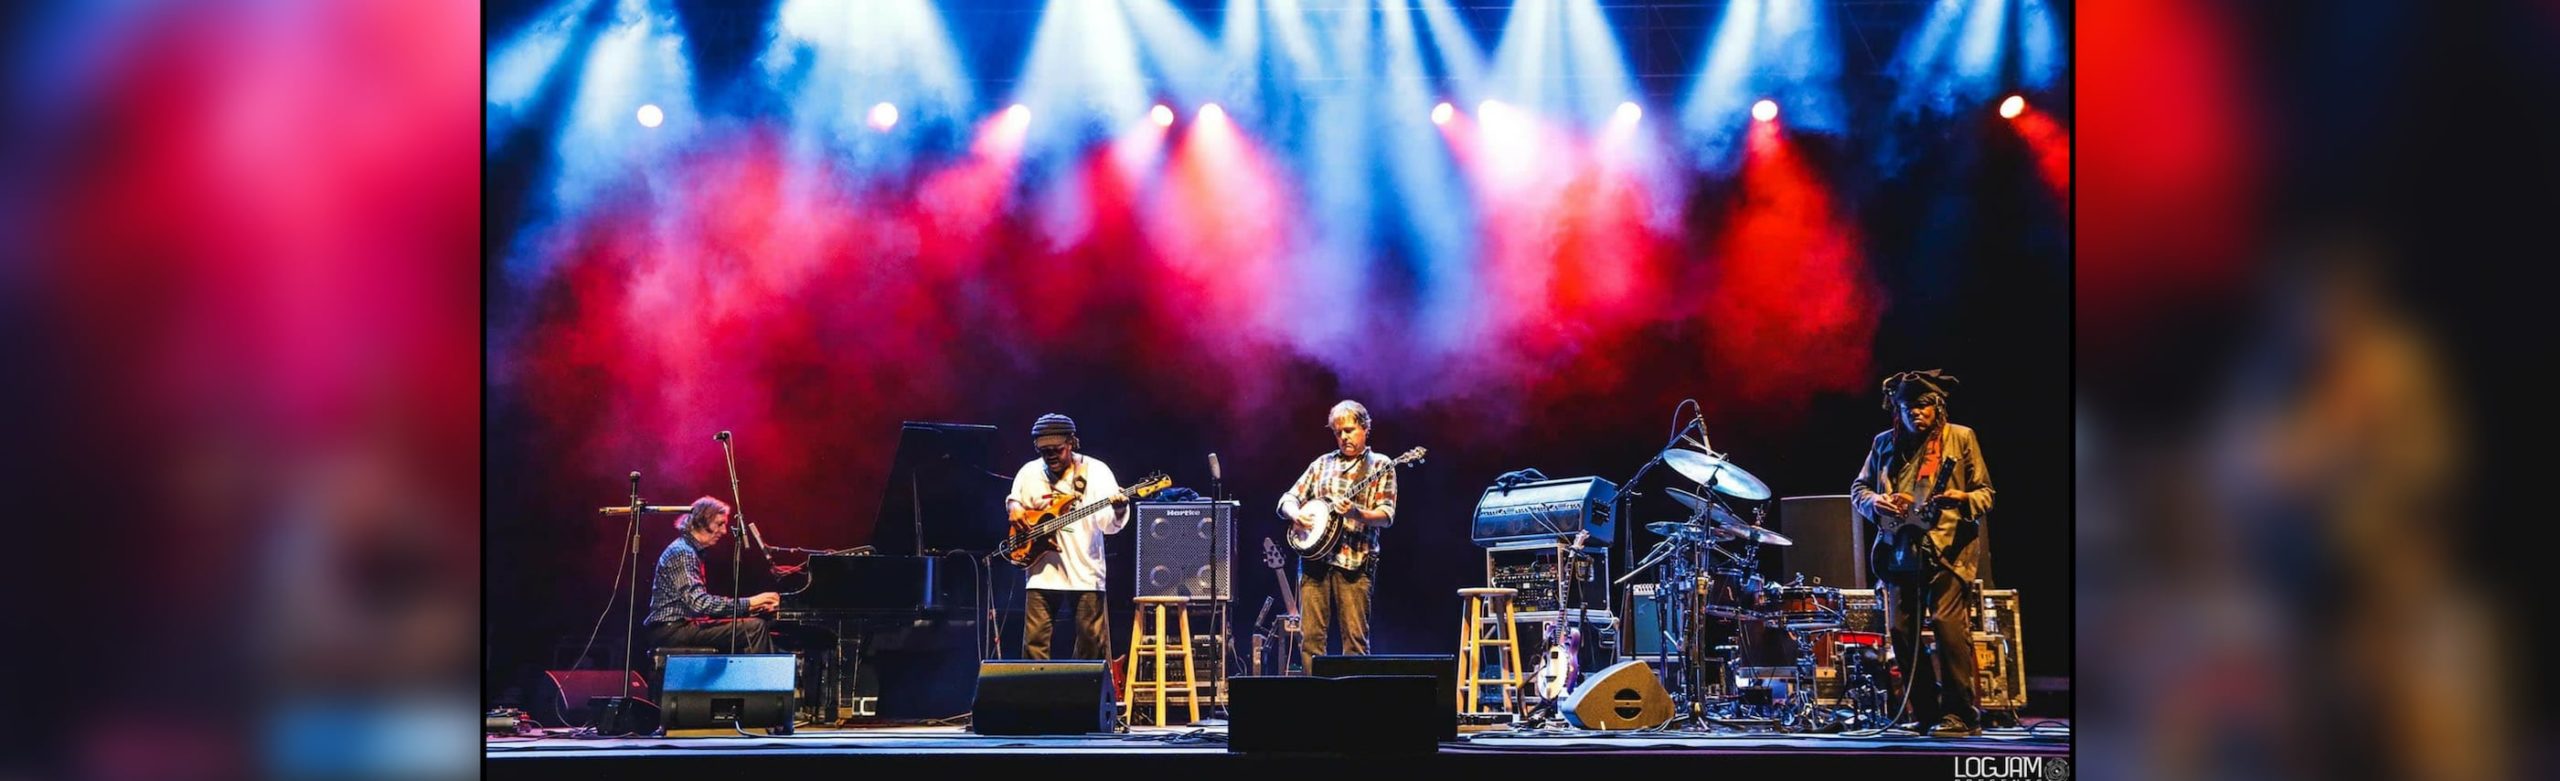 Event Info: Béla Fleck and The Flecktones at the Wilma 2019 Image